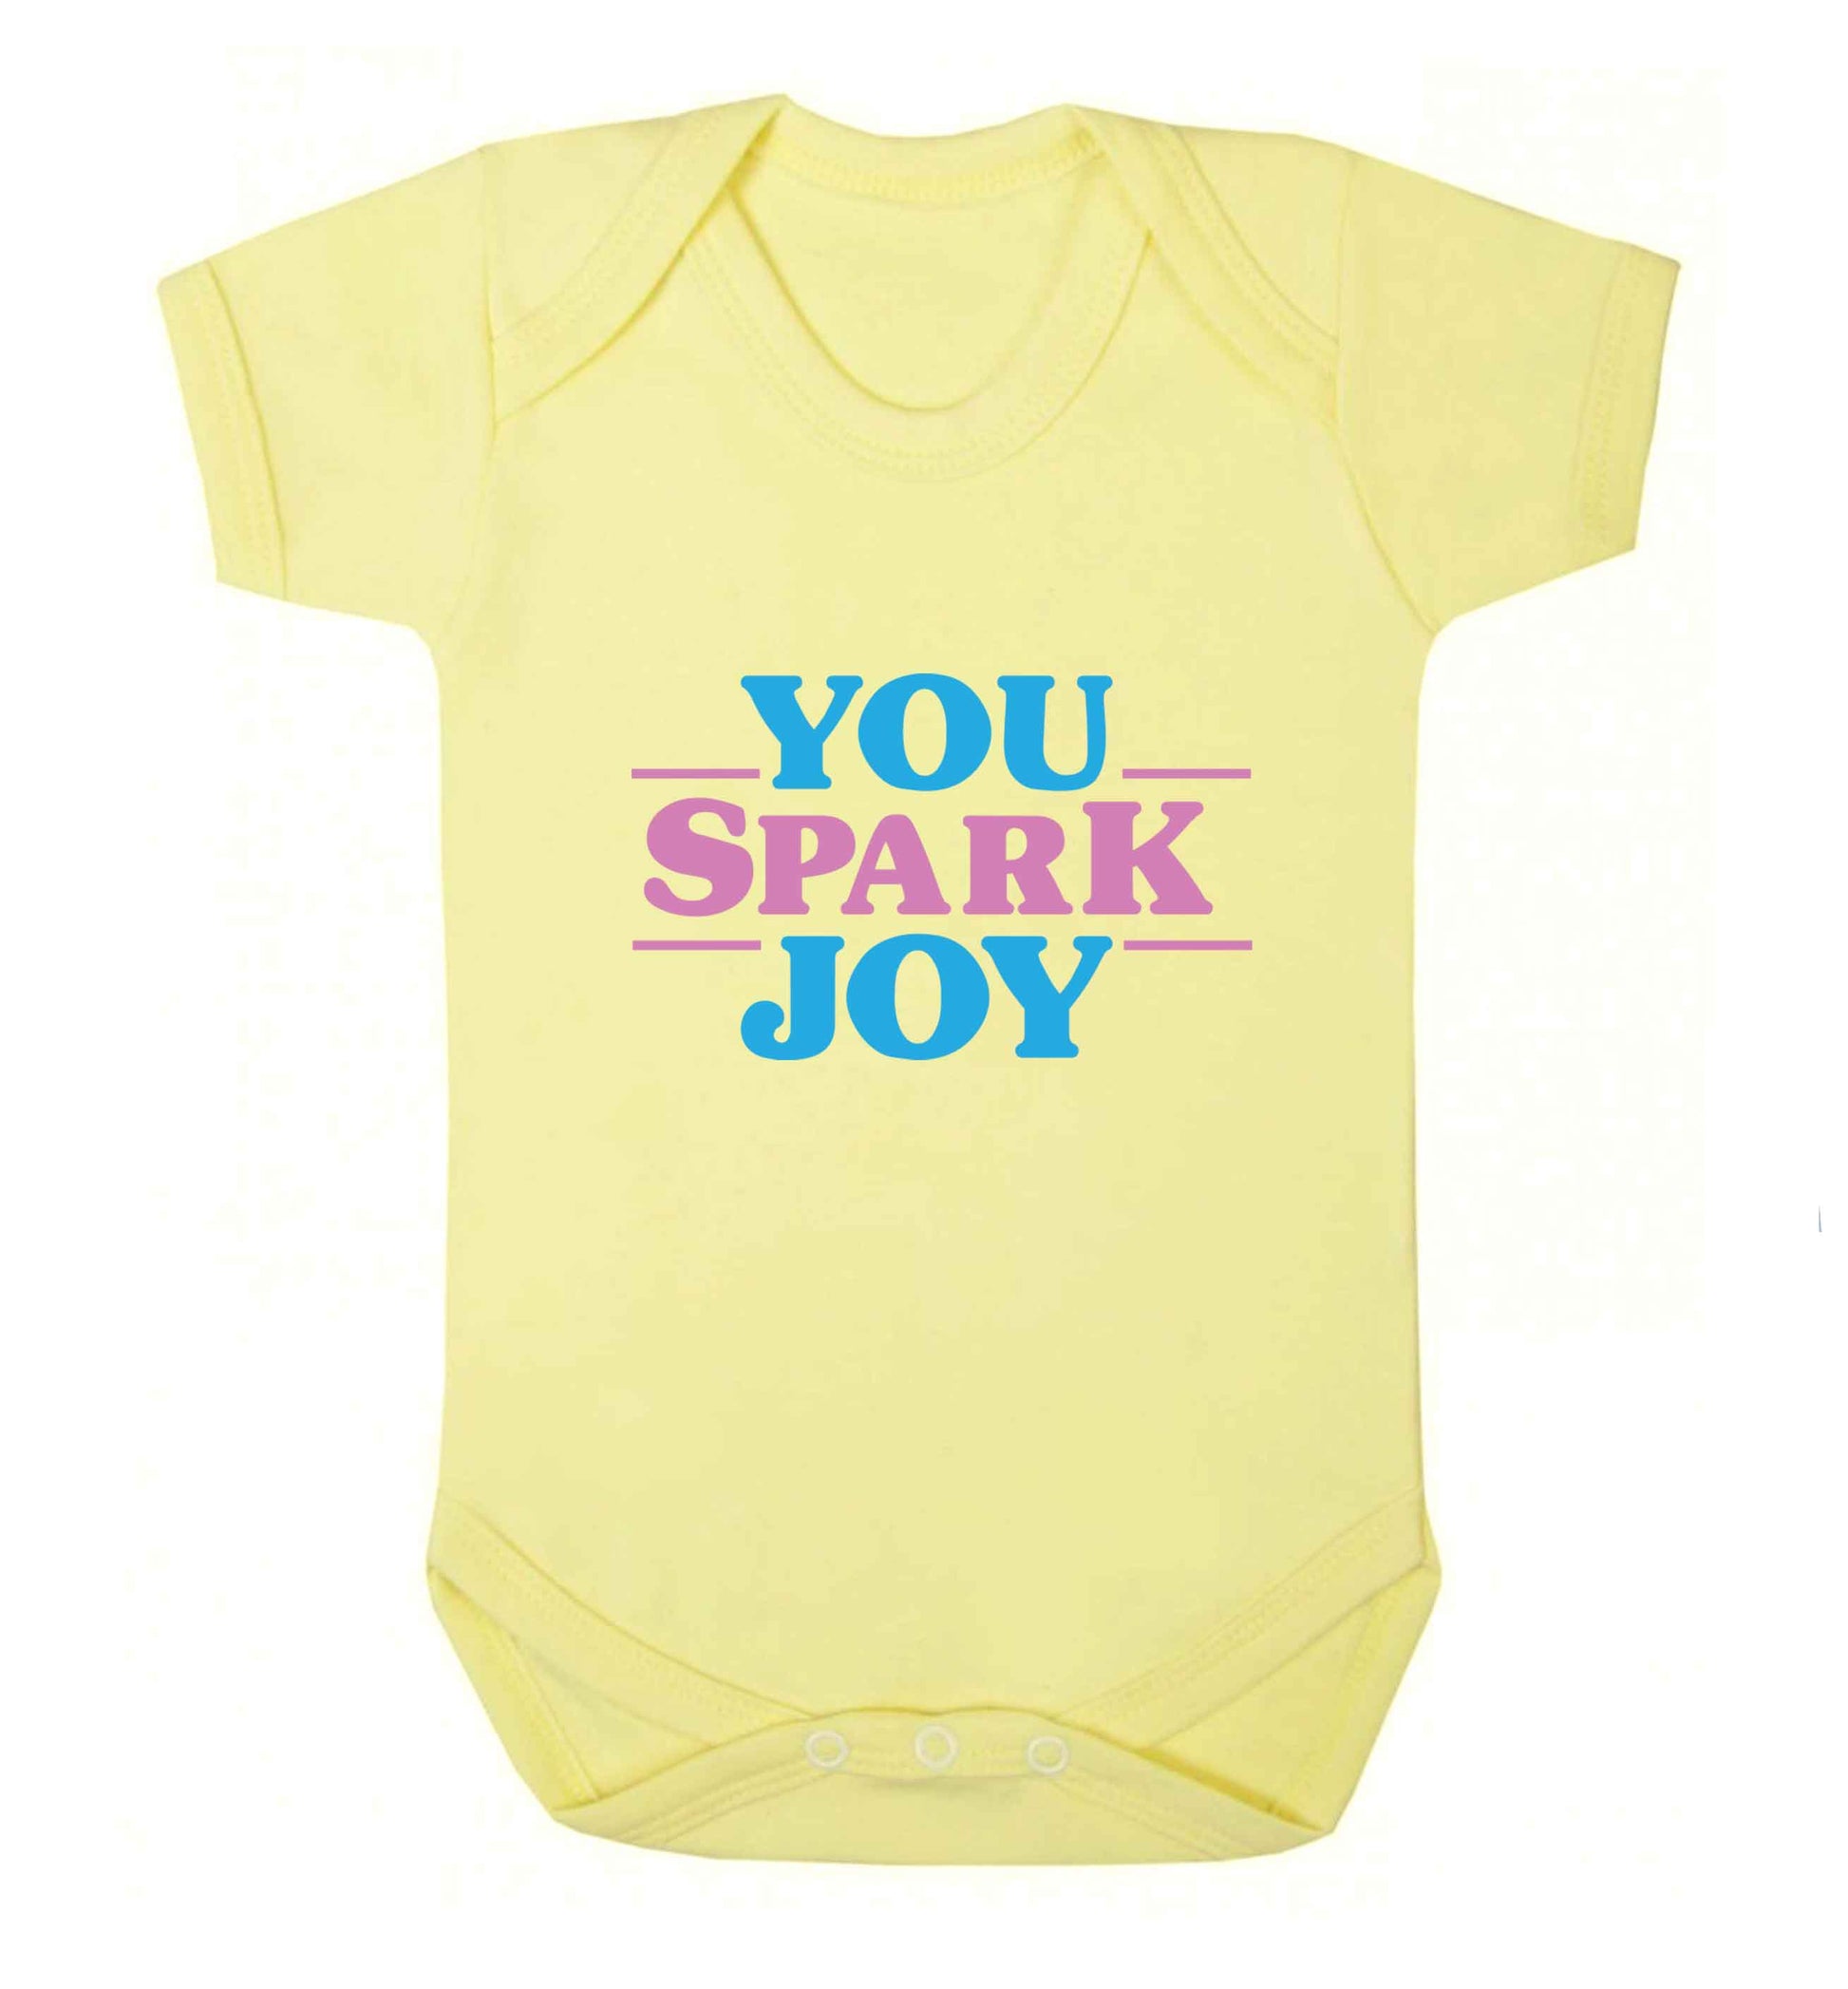 You spark joy baby vest pale yellow 18-24 months